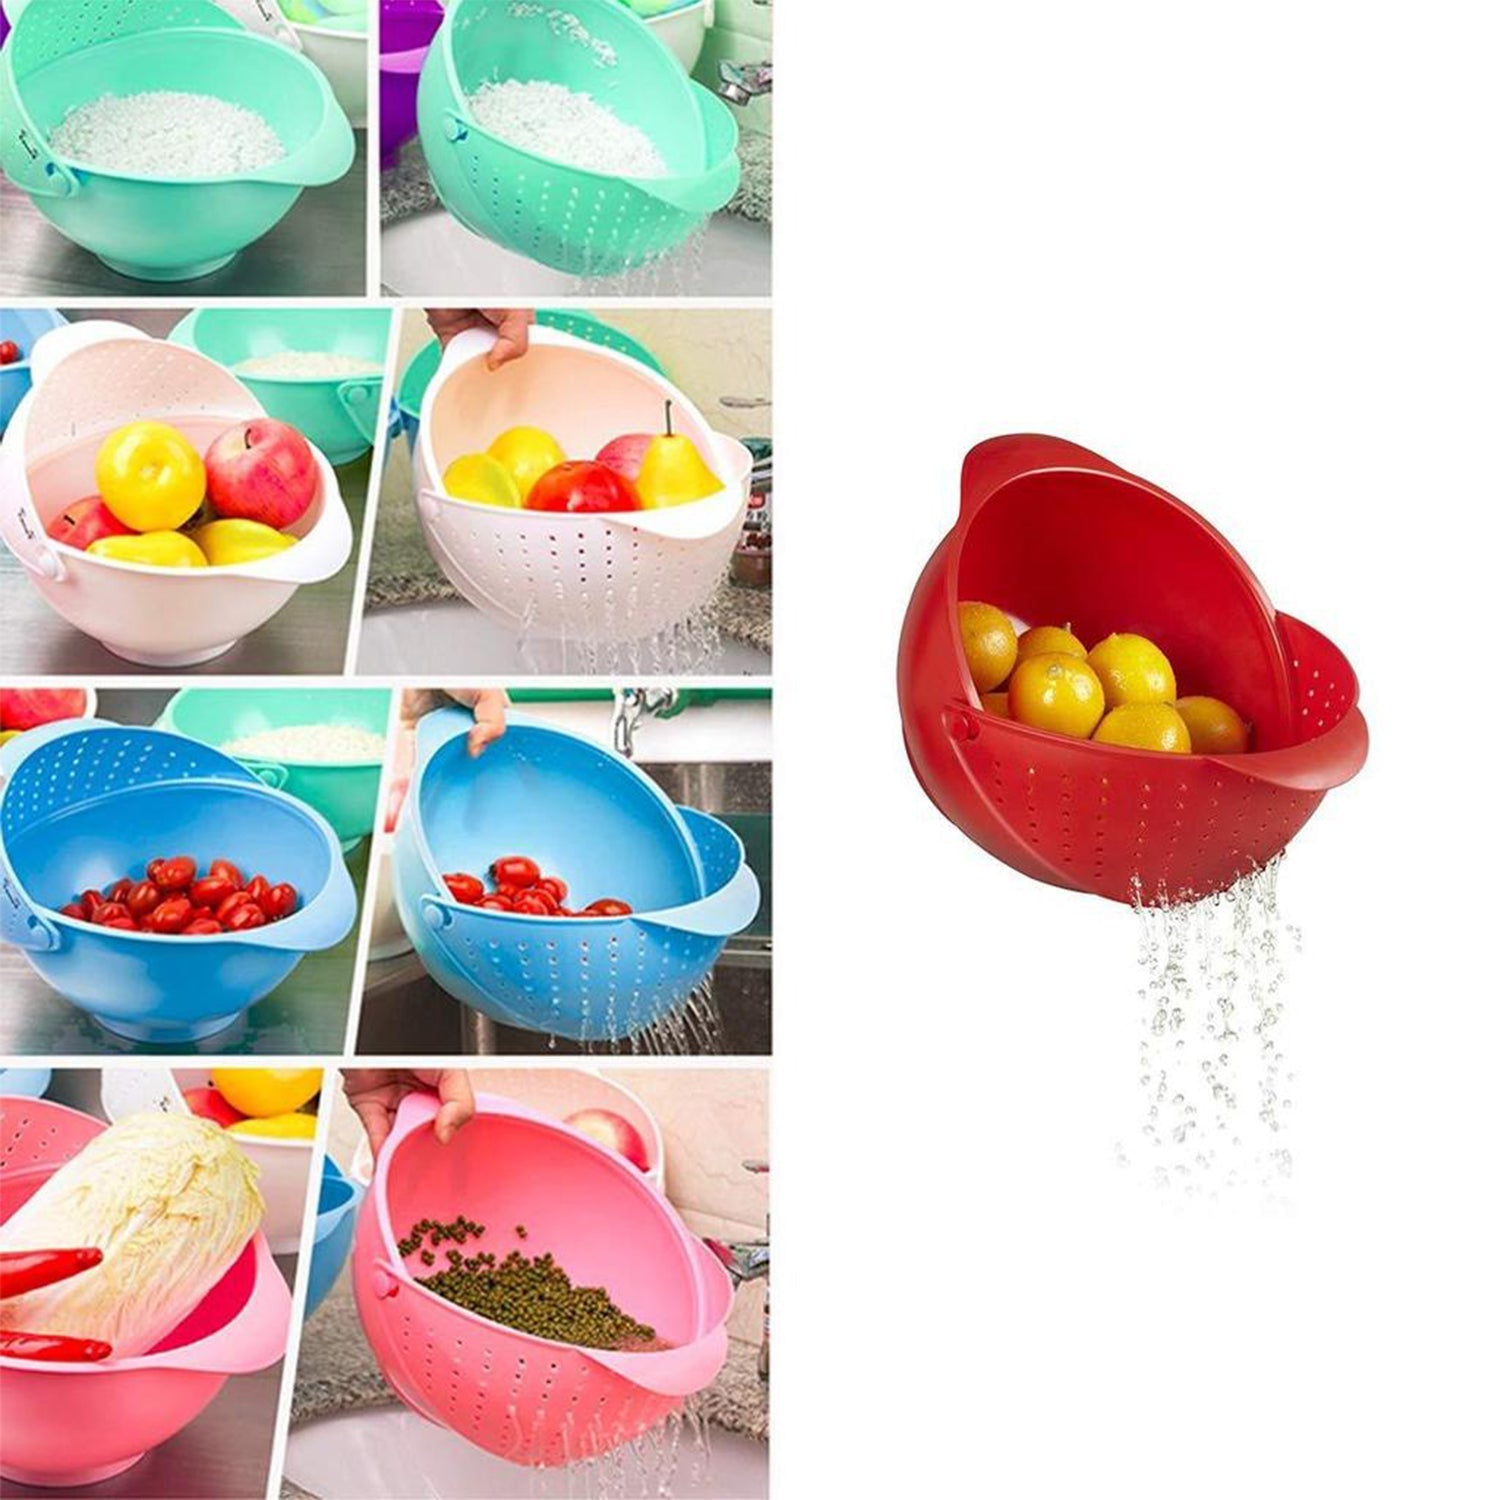 2655 Washing Bowl and Washing Utensil for Household Purposes Like Cleaning Fruits and Vegetables Etc.